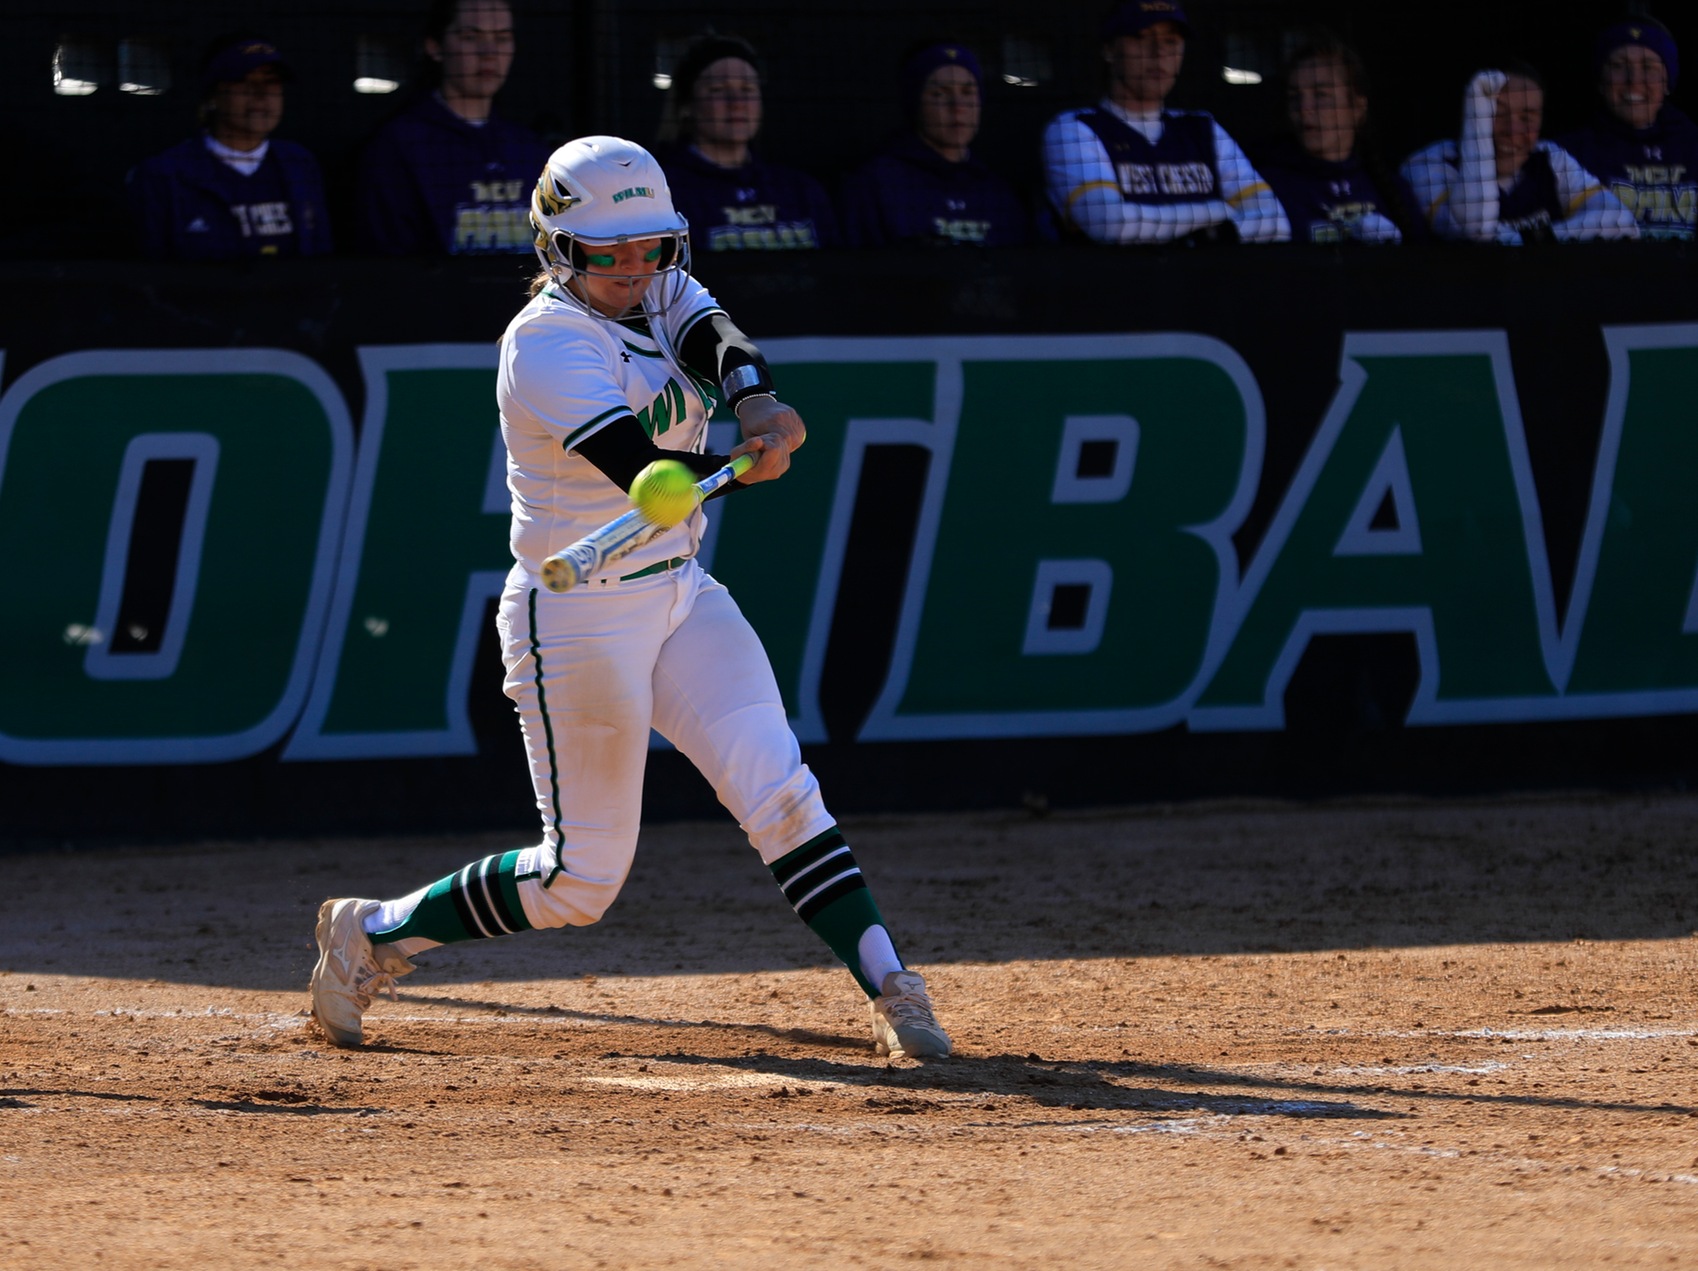 Copyright 2019; Wilmington University. All rights reserved. File photo of Lauren Lopez who set a new single game record with eight RBI at Holy Family. Photo by Chris Vitale. March 26, 2019 vs. West Chester.